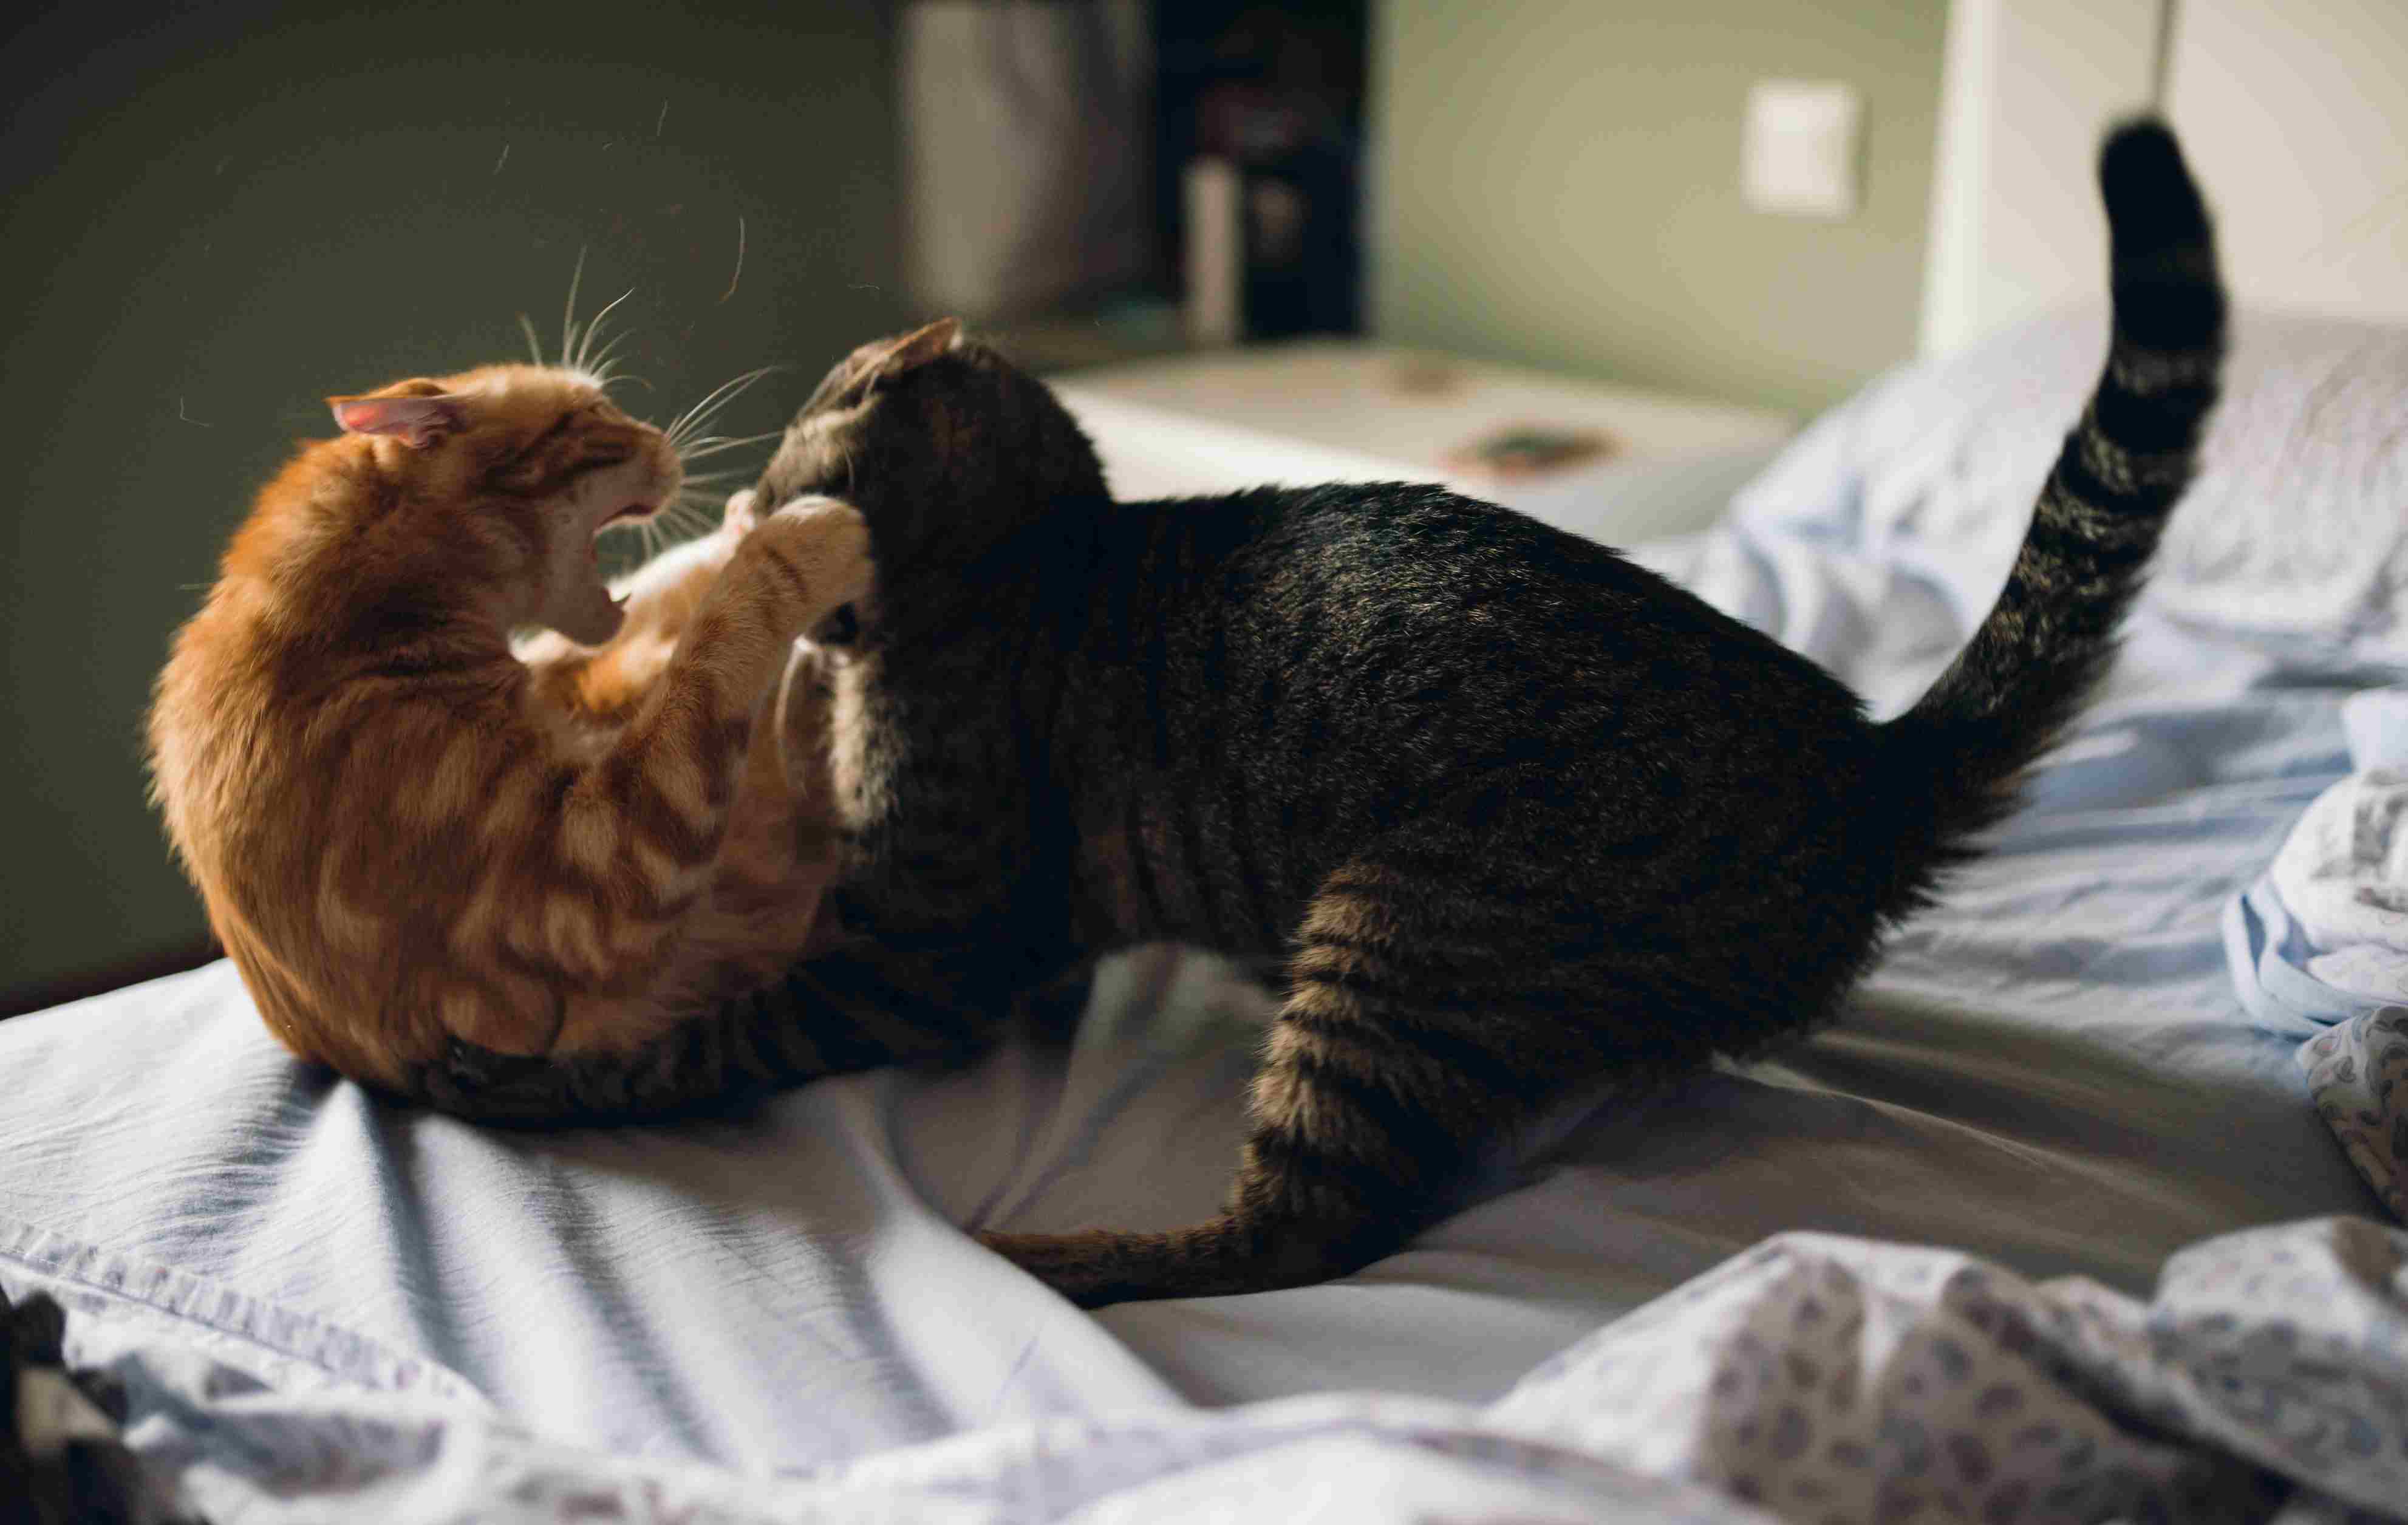 Two cats playing har on a bed